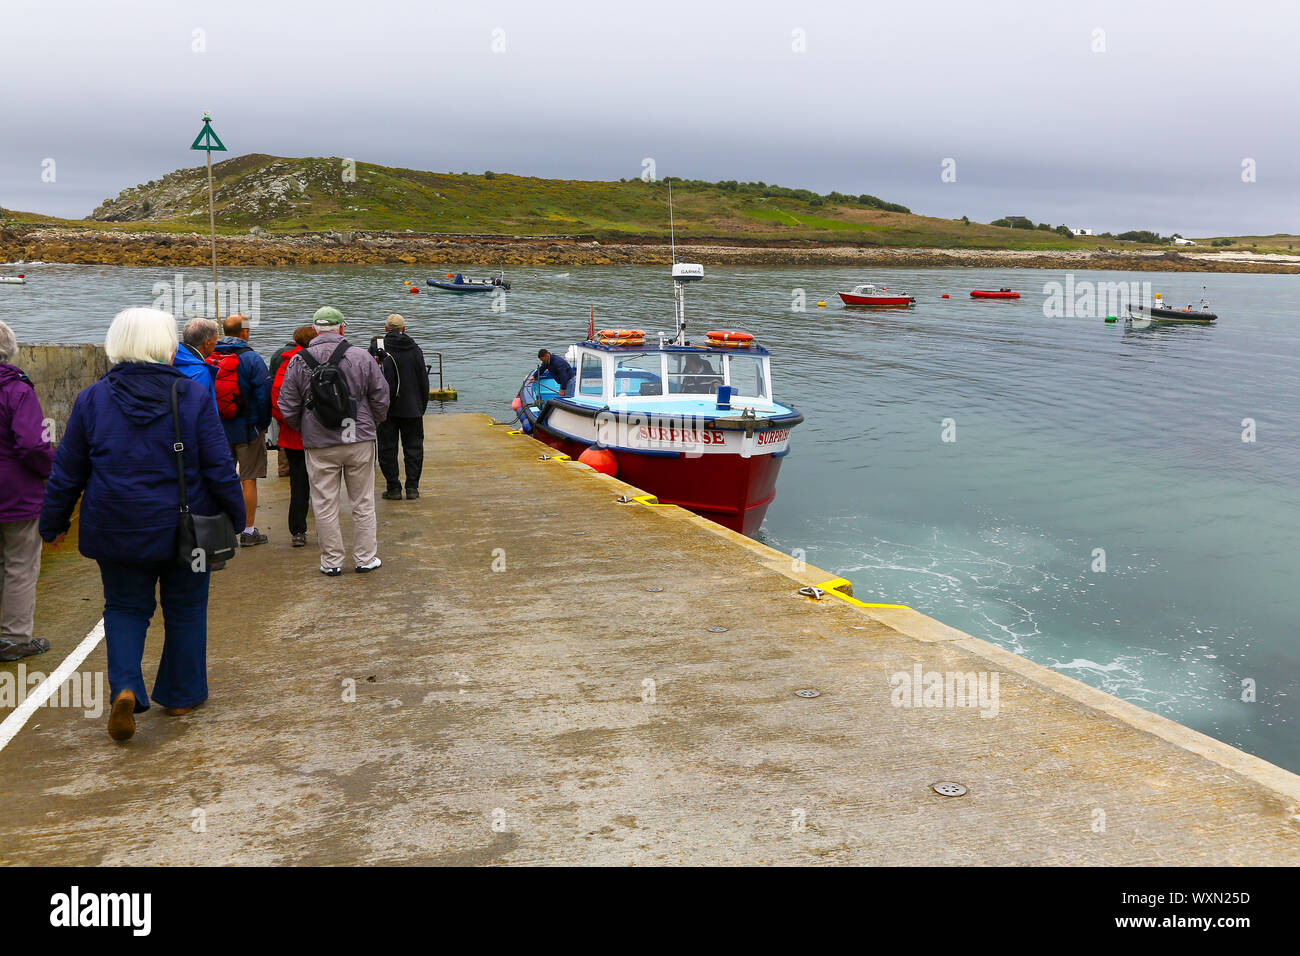 A boat called Surprise arriving, and tourists waiting to board, at the quay St. Agnes Island, Isles of Scilly, Cornwall, England, UK Stock Photo